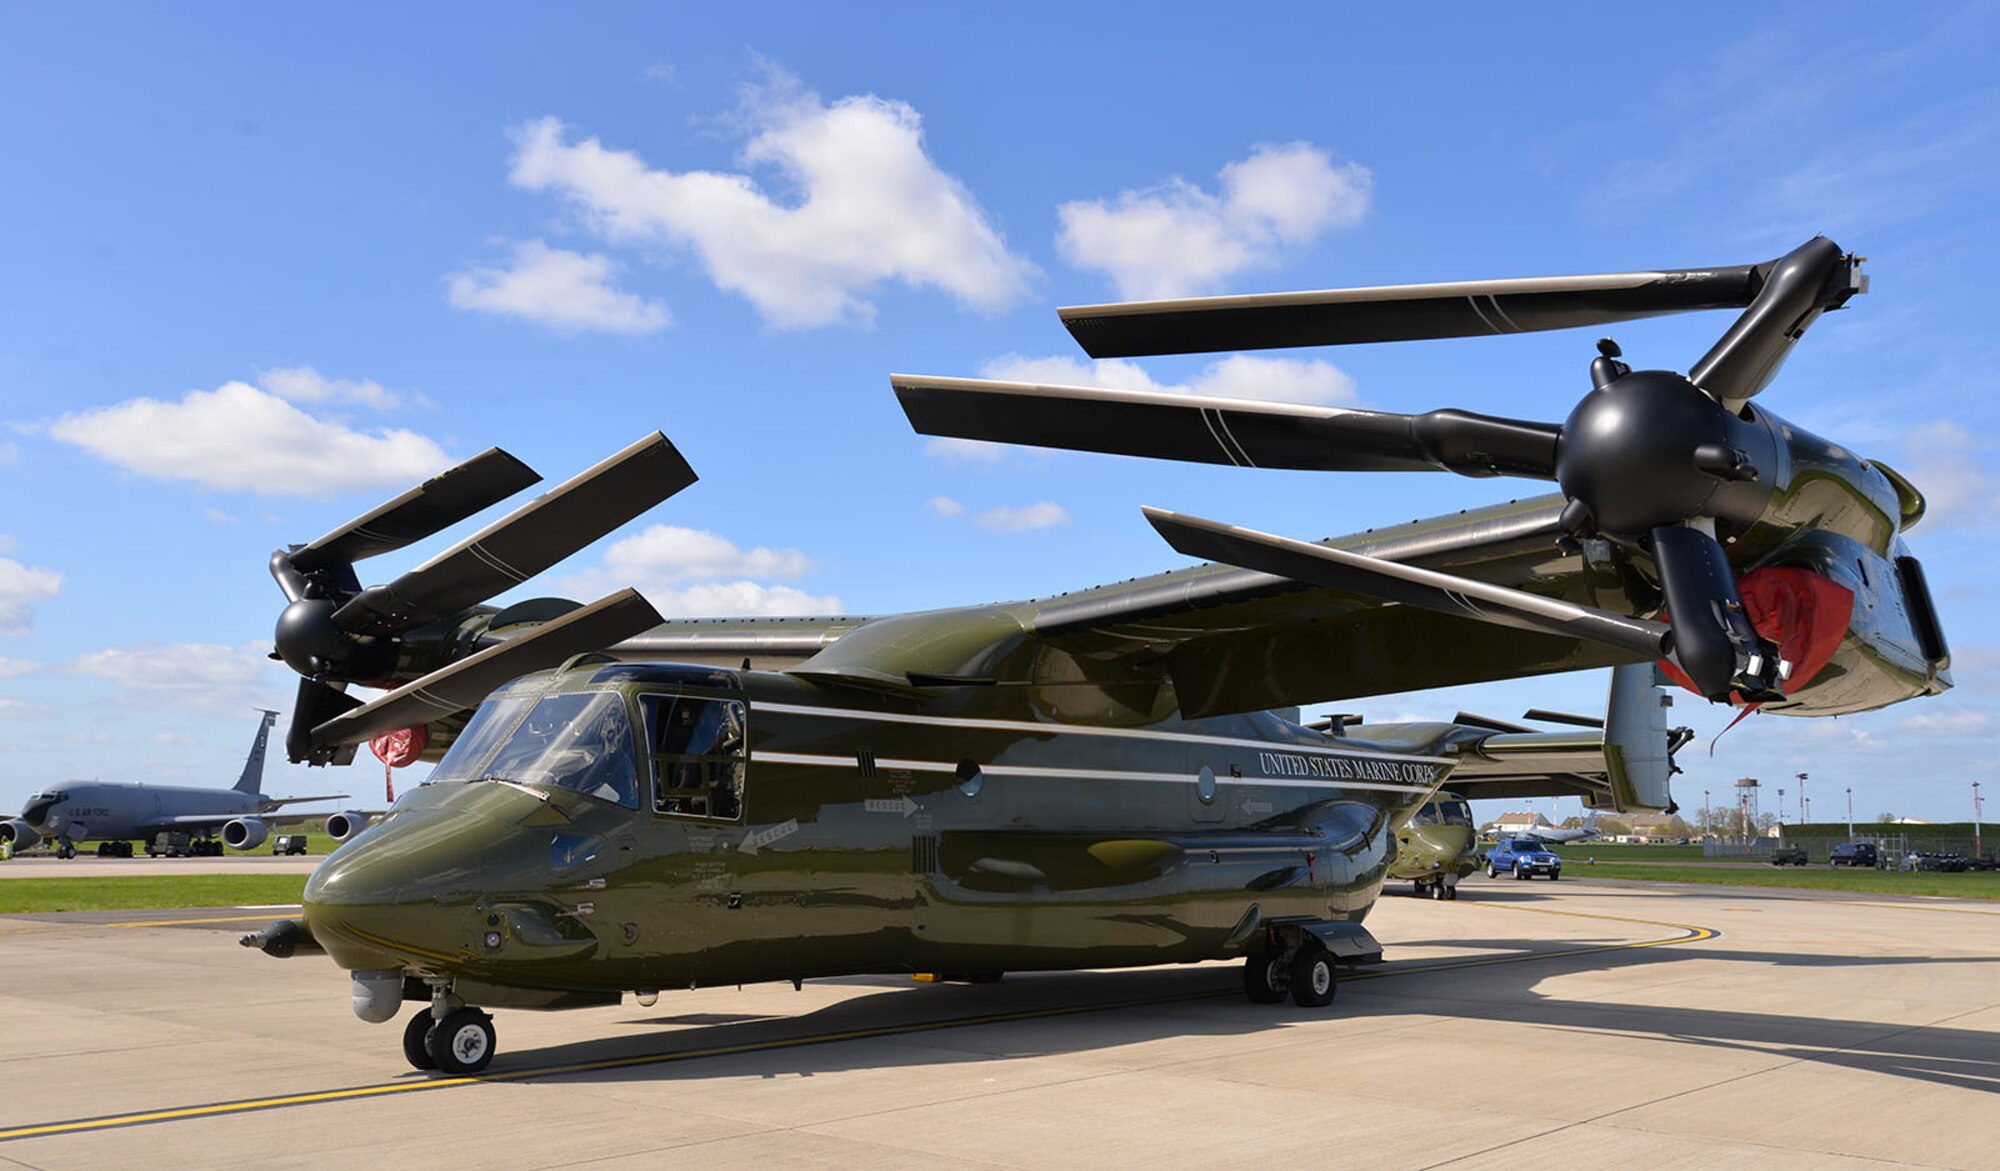 A U.S. Marine Corps MV-22 Osprey sits on the flightline April 19, 2016, on RAF Mildenhall, England. The multi-mission, tilt-rotor military aircraft, based out of Quantico, Va., were at RAF Mildenhall in support of the President’s visit to the United Kingdom for bilateral meetings and to the Hannover Messe being held in Germany. U.S. European Command and US Air Forces in Europe-Air Forces Africa were working with other government agencies in the U.K. and Germany to provide assistance as requested, to ensure a successful visit. (U.S. Air Force photo by Karen Abeyasekere/Released)